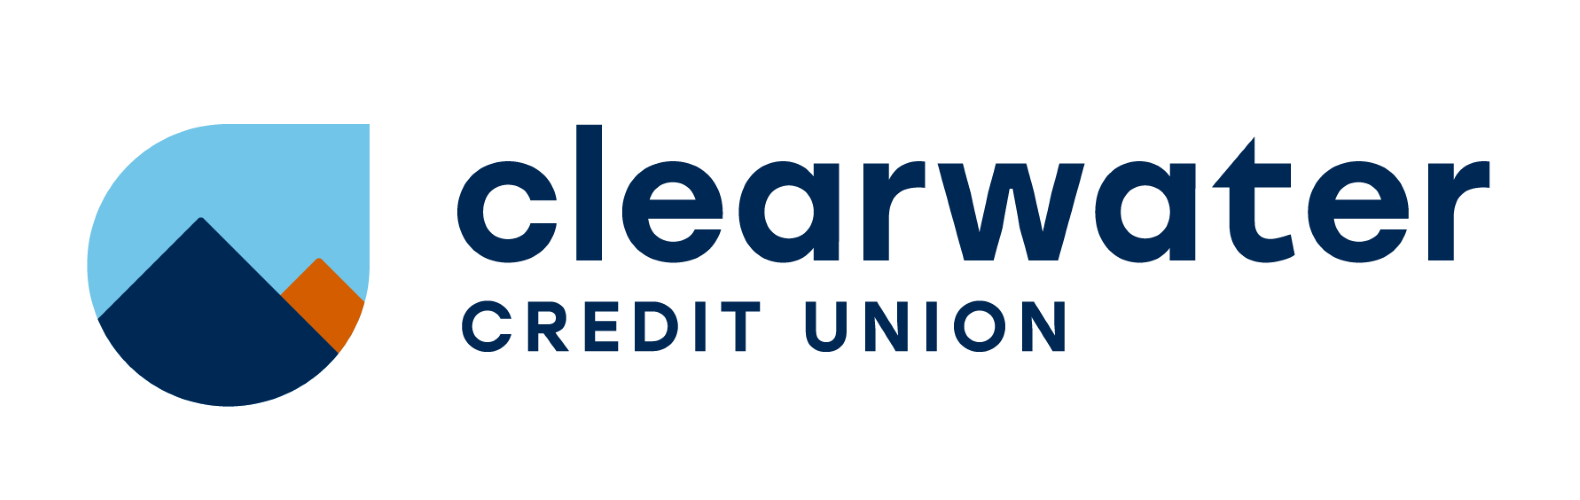 Clearwater_MainLogo_RGB_1580.png